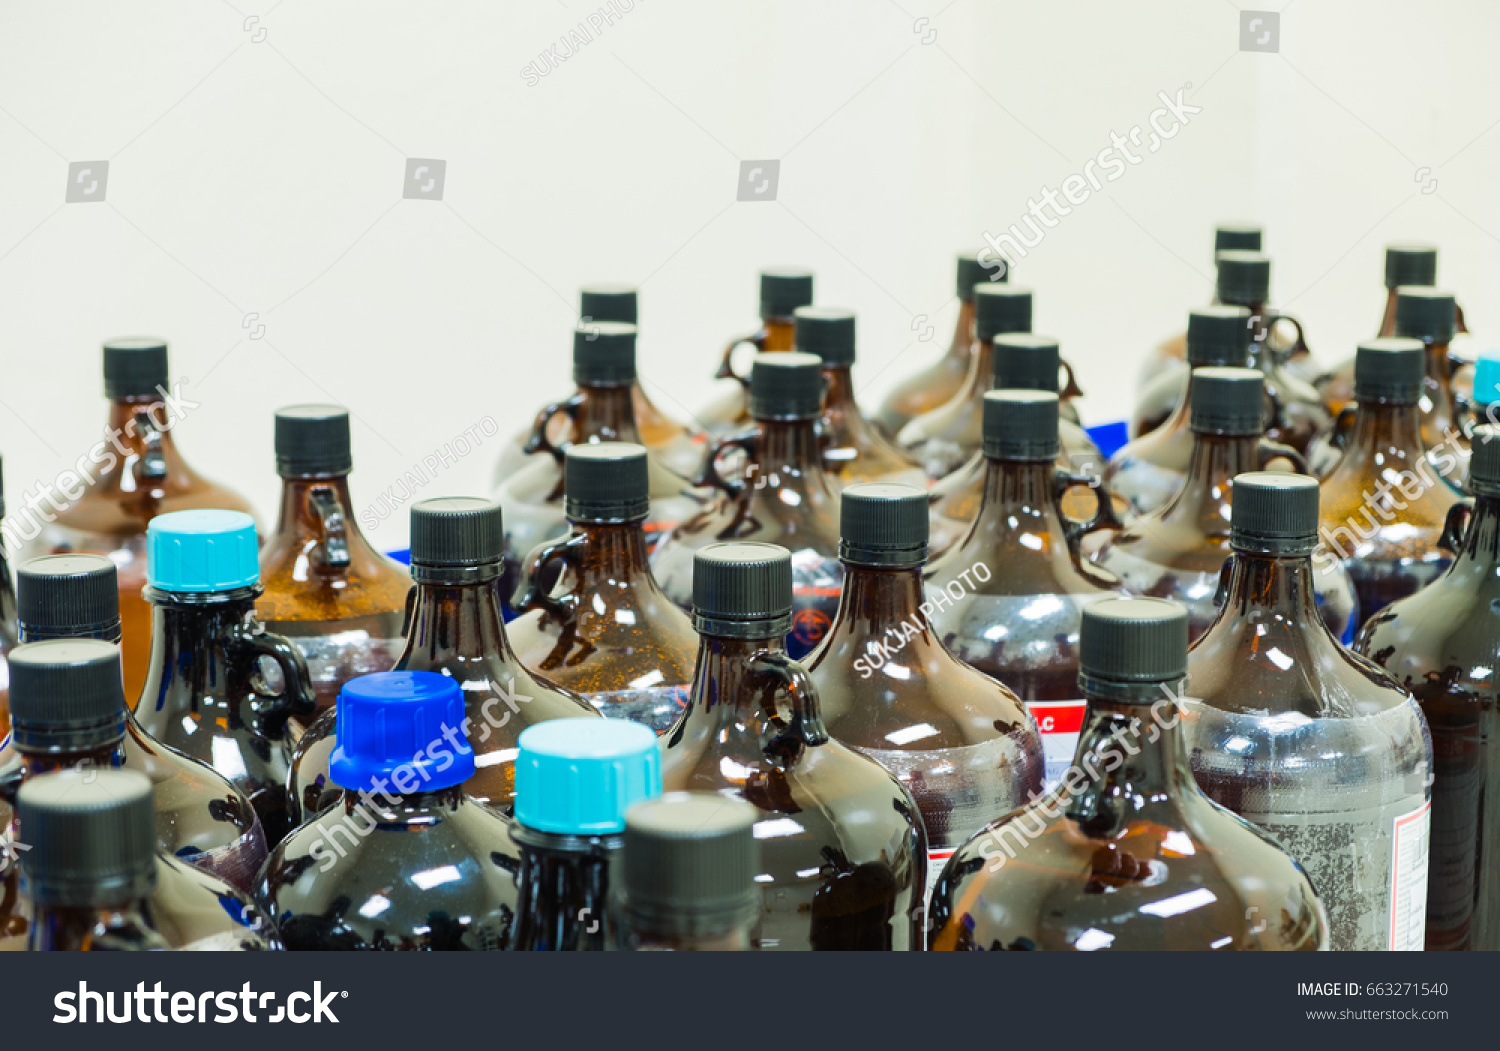 Download Many Amber Glass Bottle Contains Chemical Stock Photo Edit Now 663271540 PSD Mockup Templates